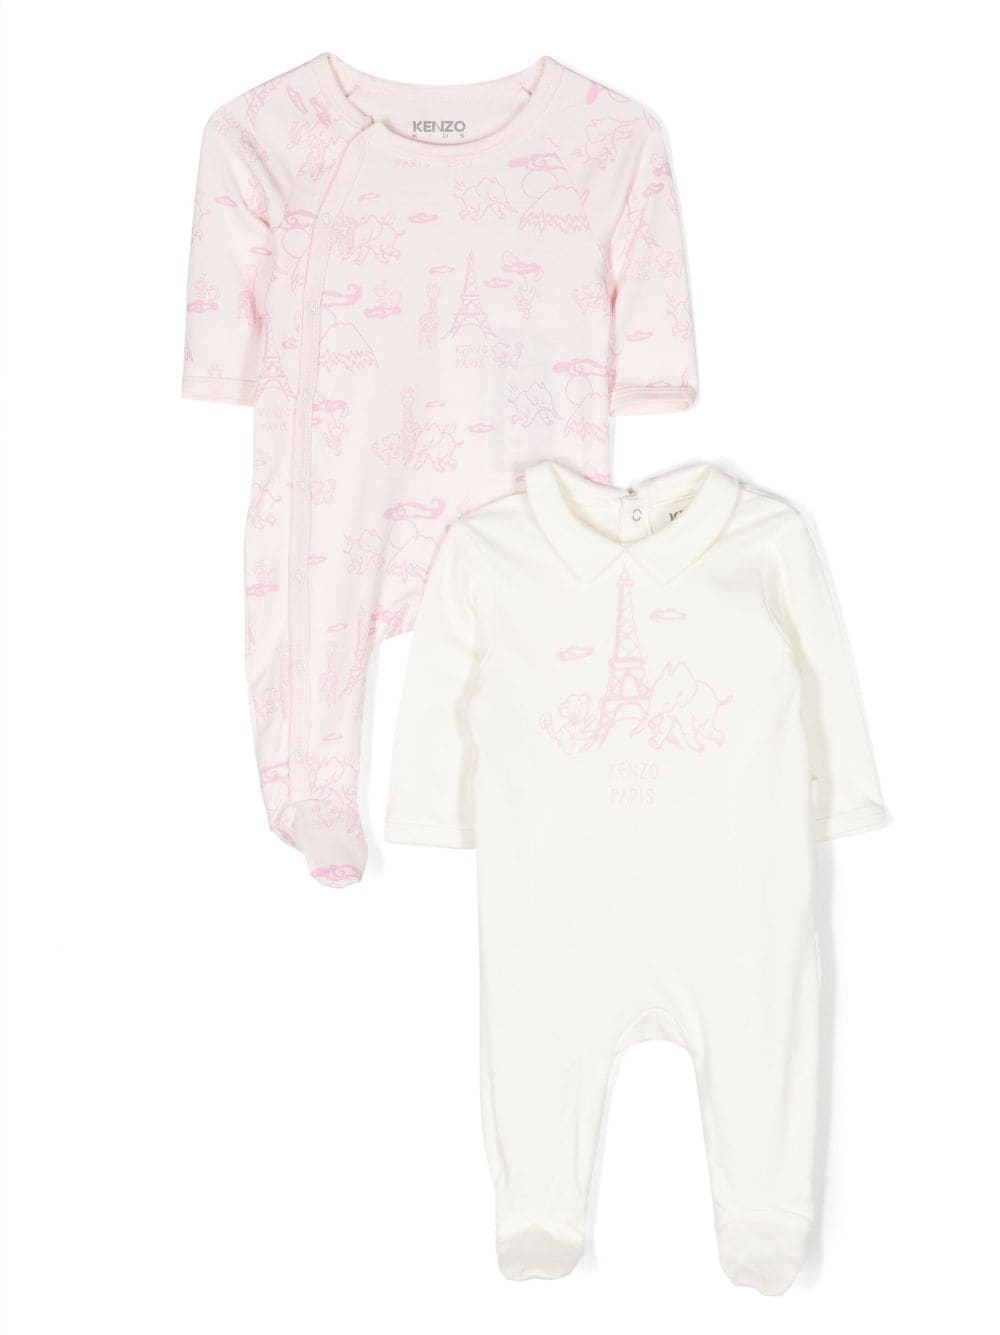 Cotton jersey baby boy KENZO two rompers set